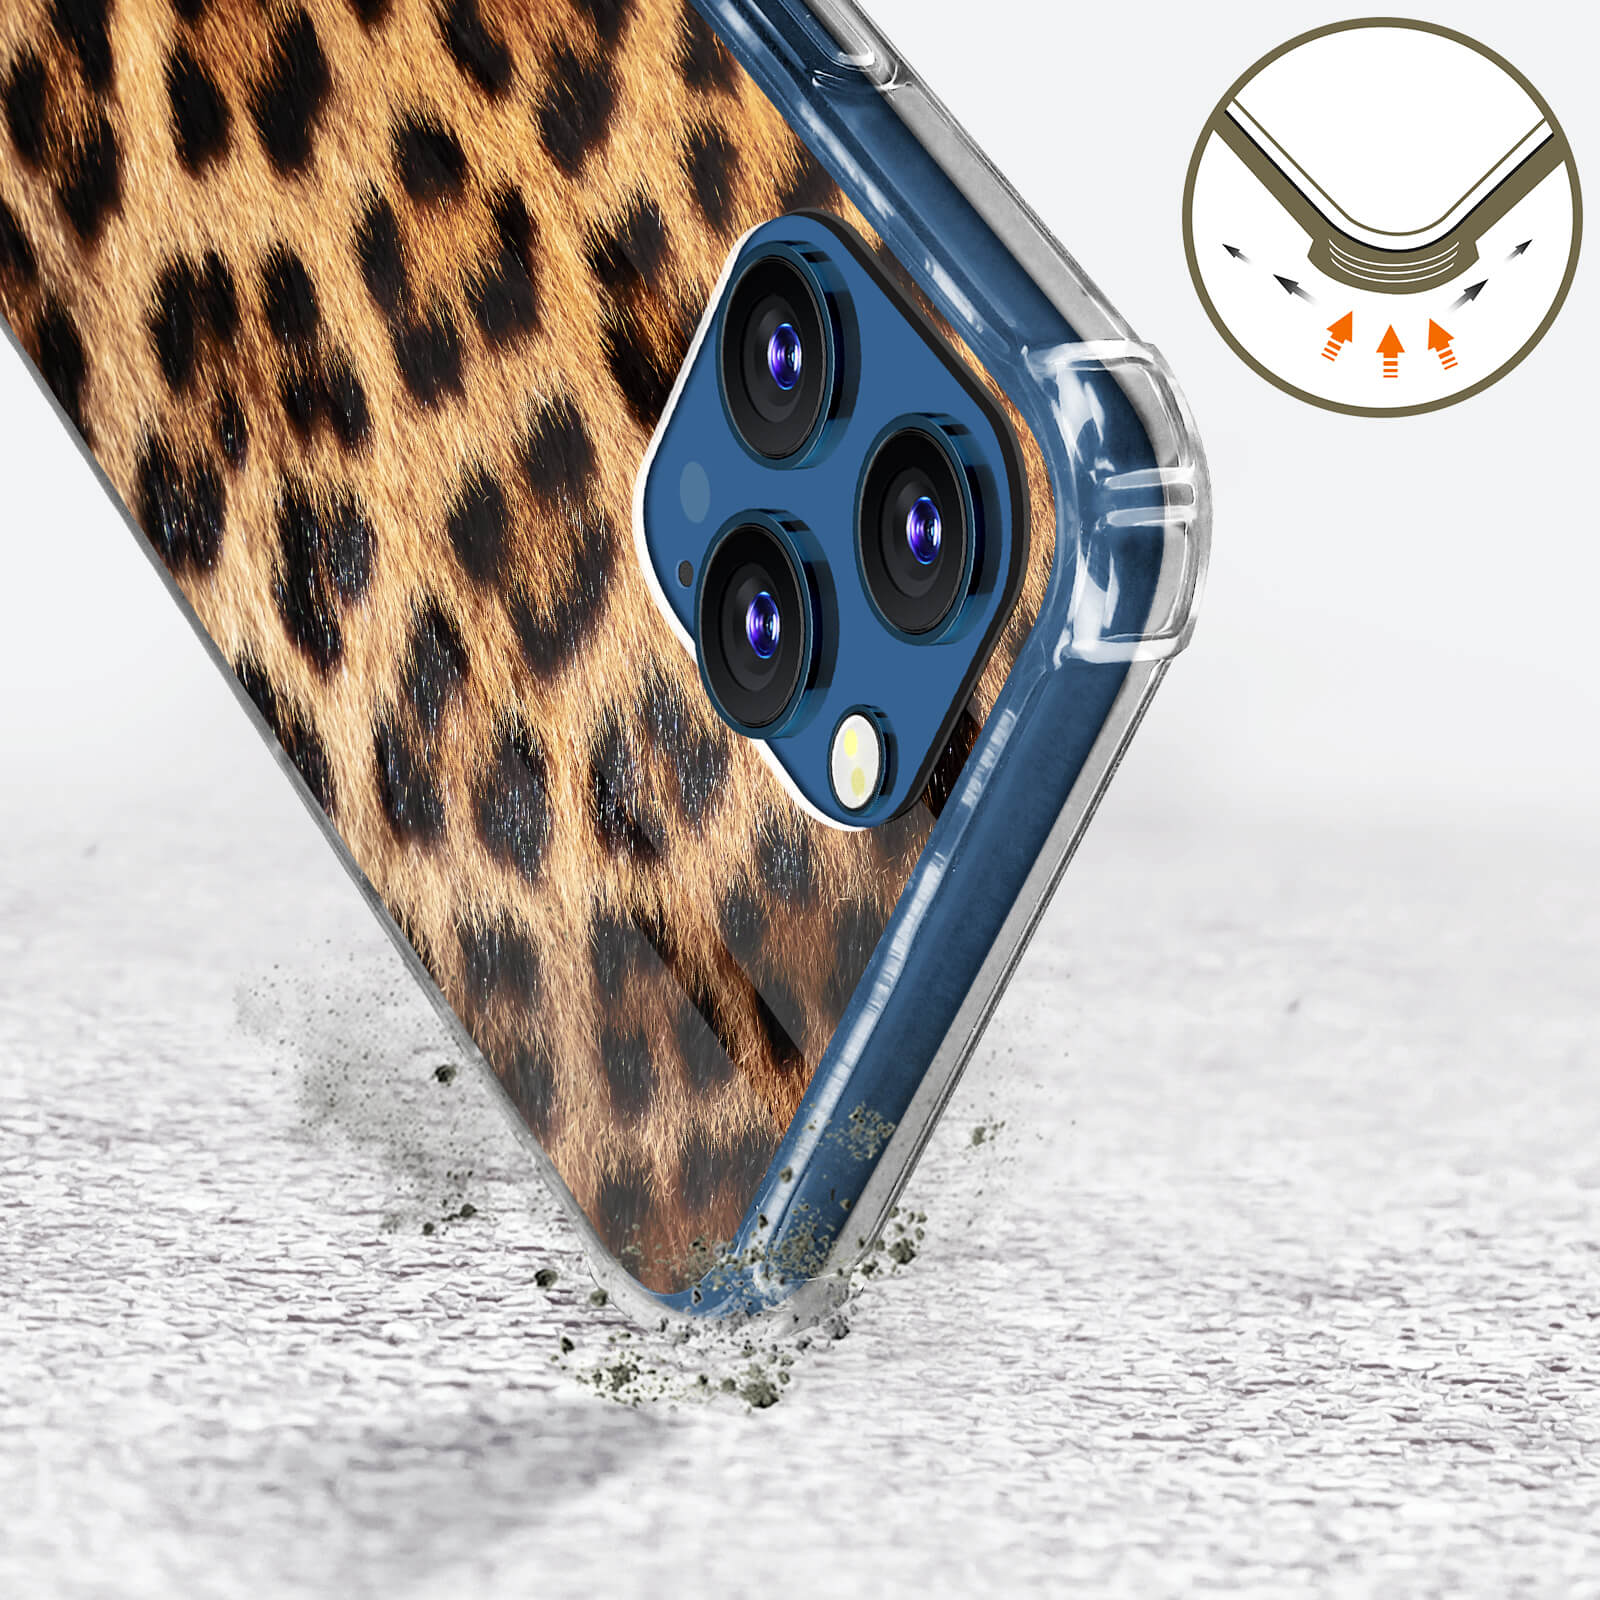 GUESS Leopard Muster Series, iPhone Apple, Orange 12 Pro Backcover, Max